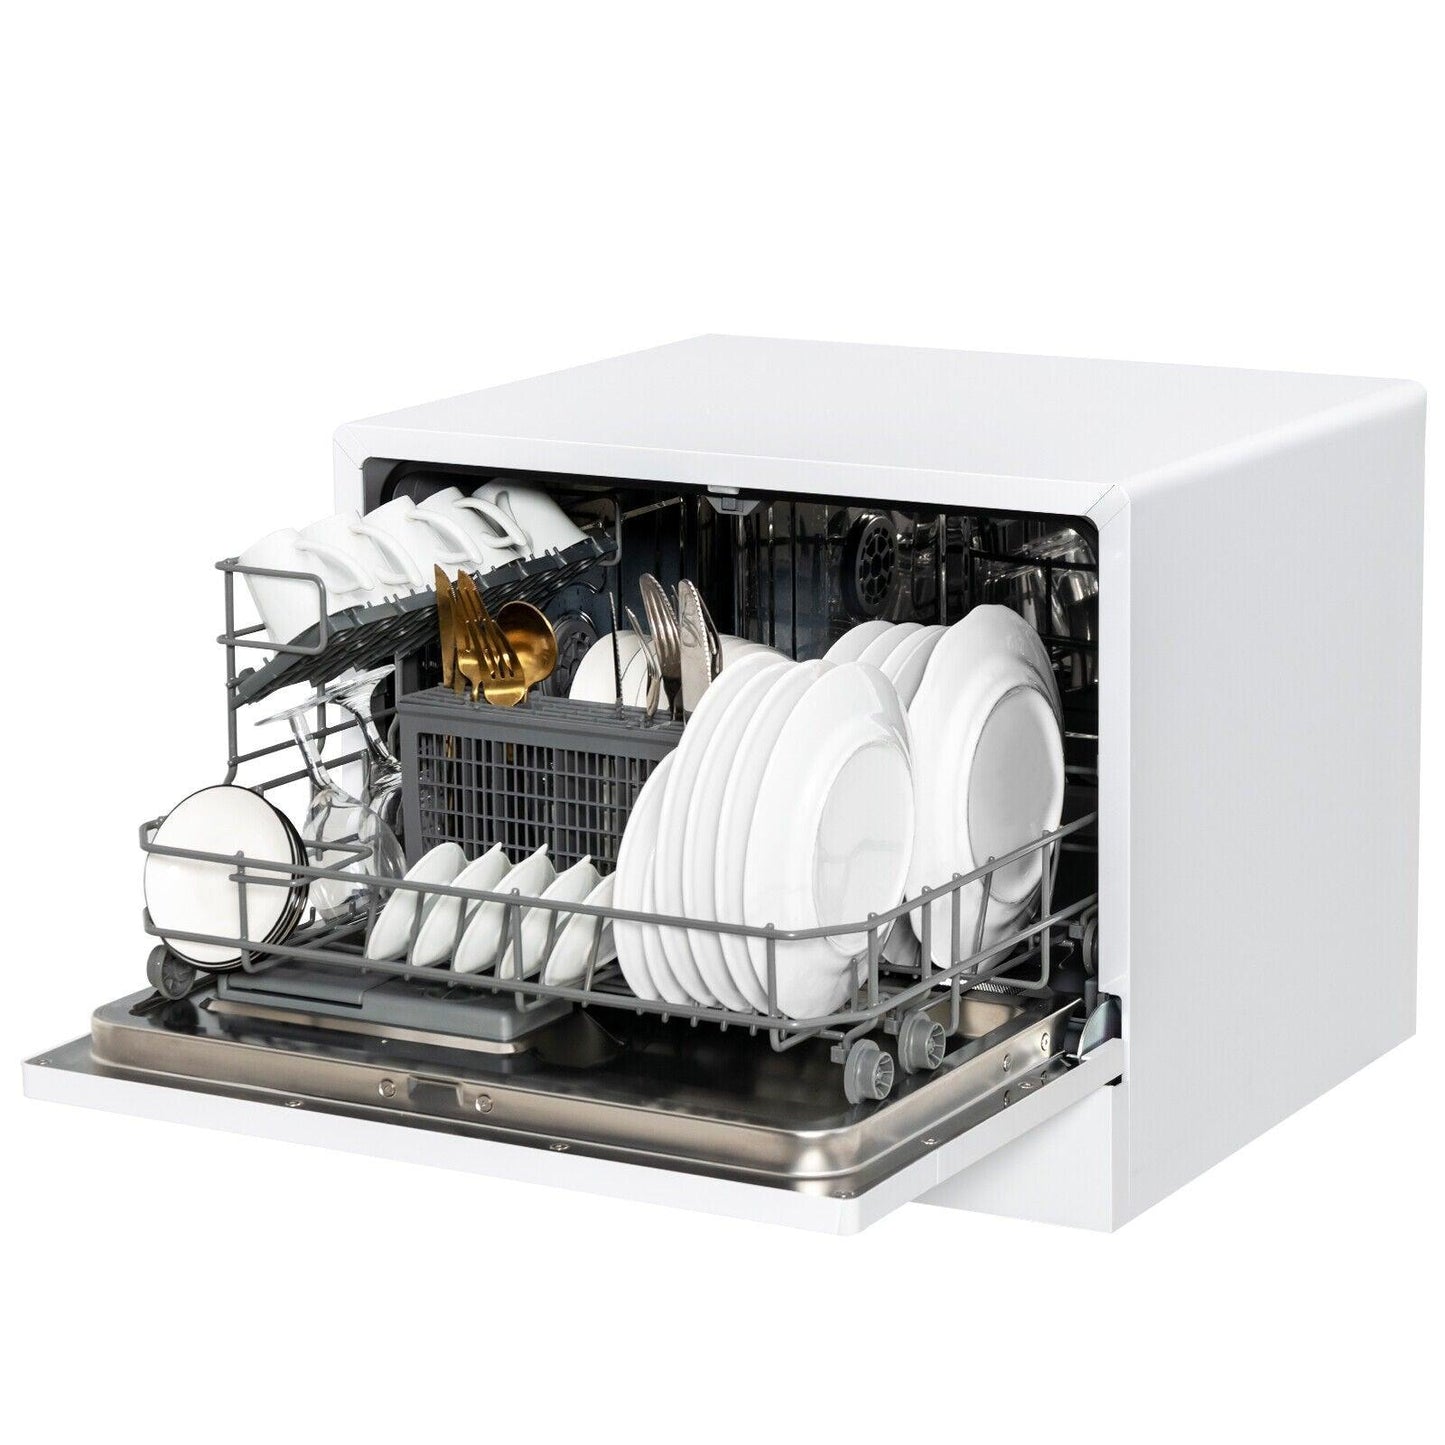 Compact Countertop Dishwasher FP10217,with 6 Place Settings and 5 Washing Programs